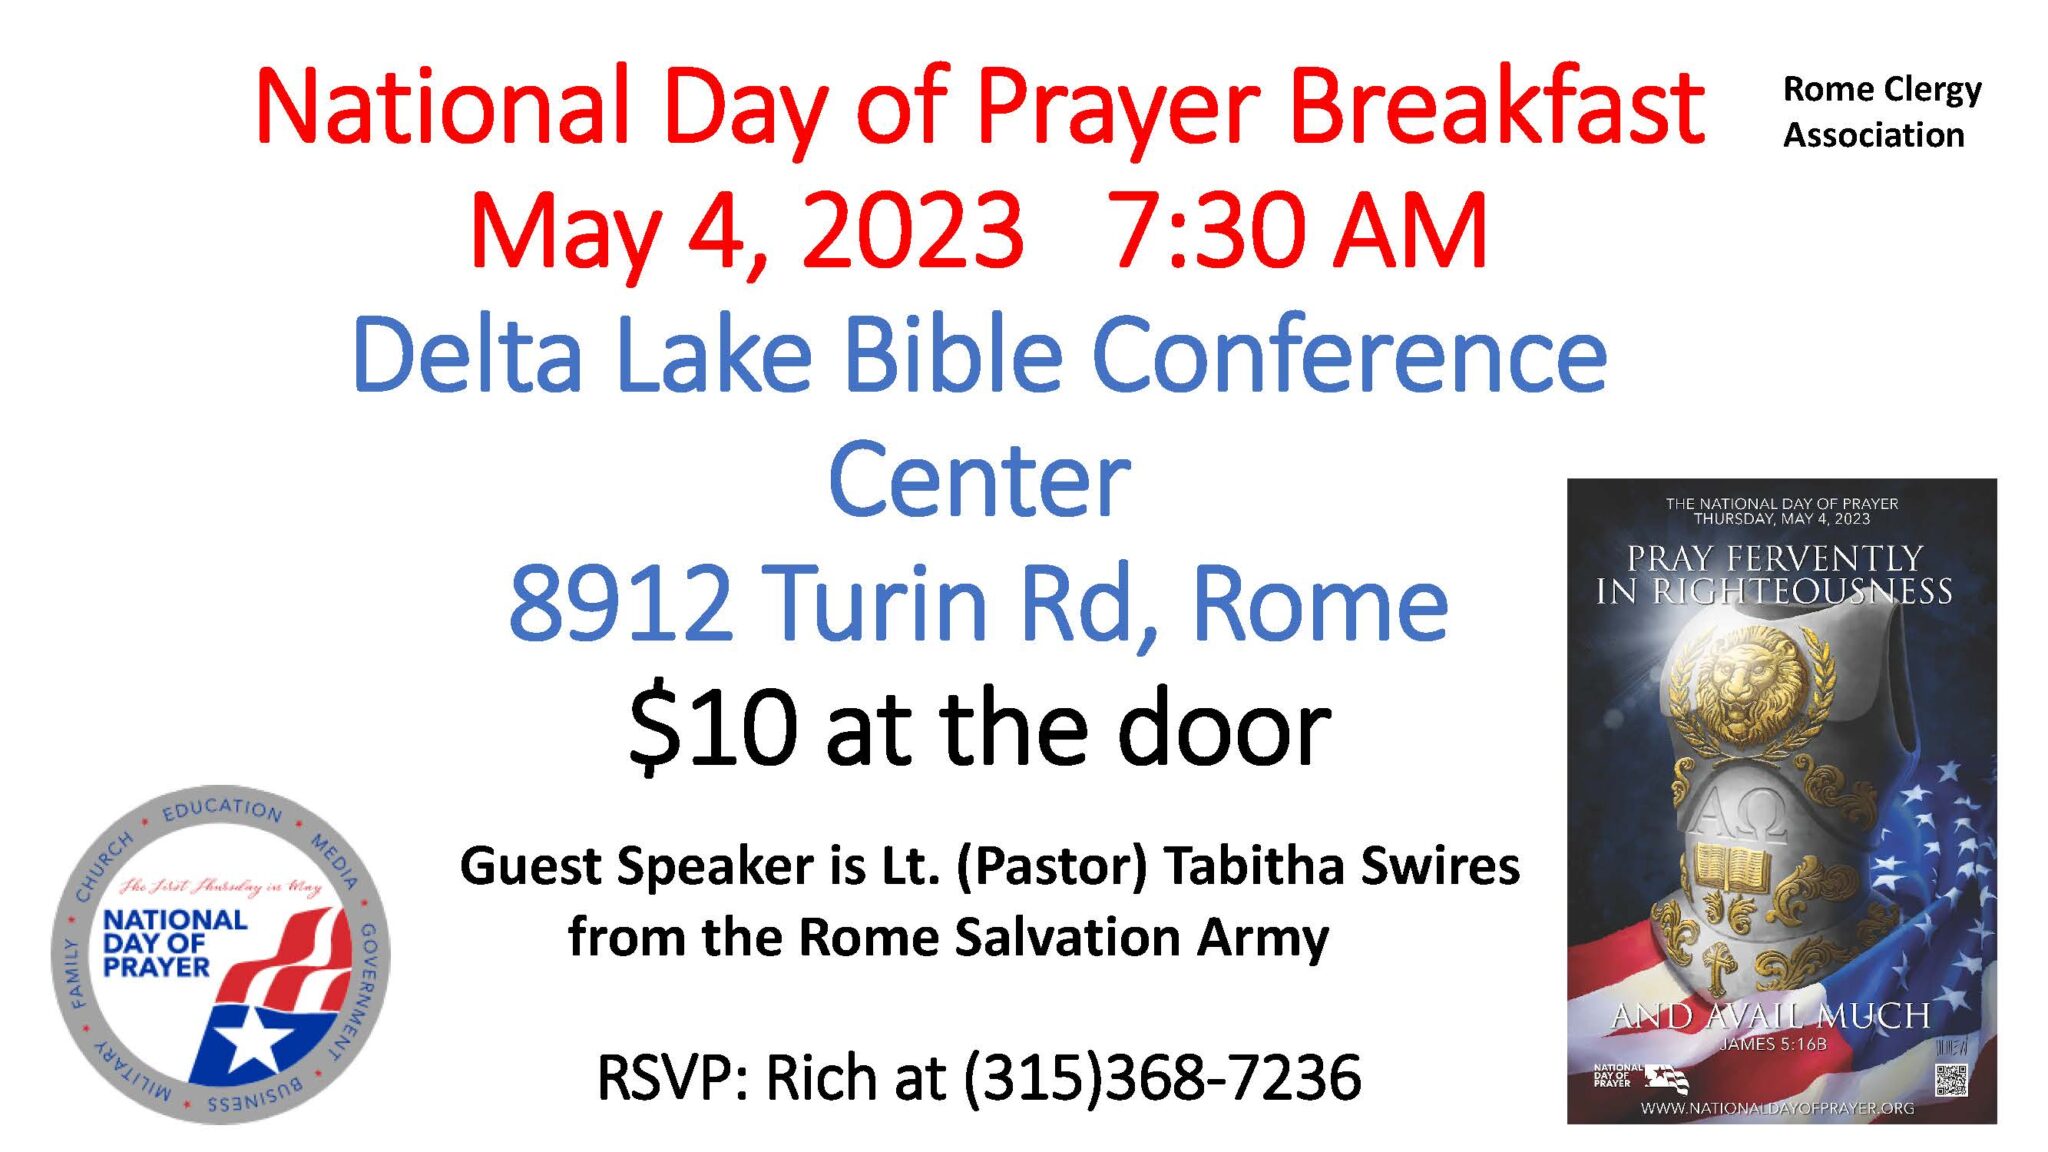 National Day of Prayer Breakfast presented by Rome Clergy Association